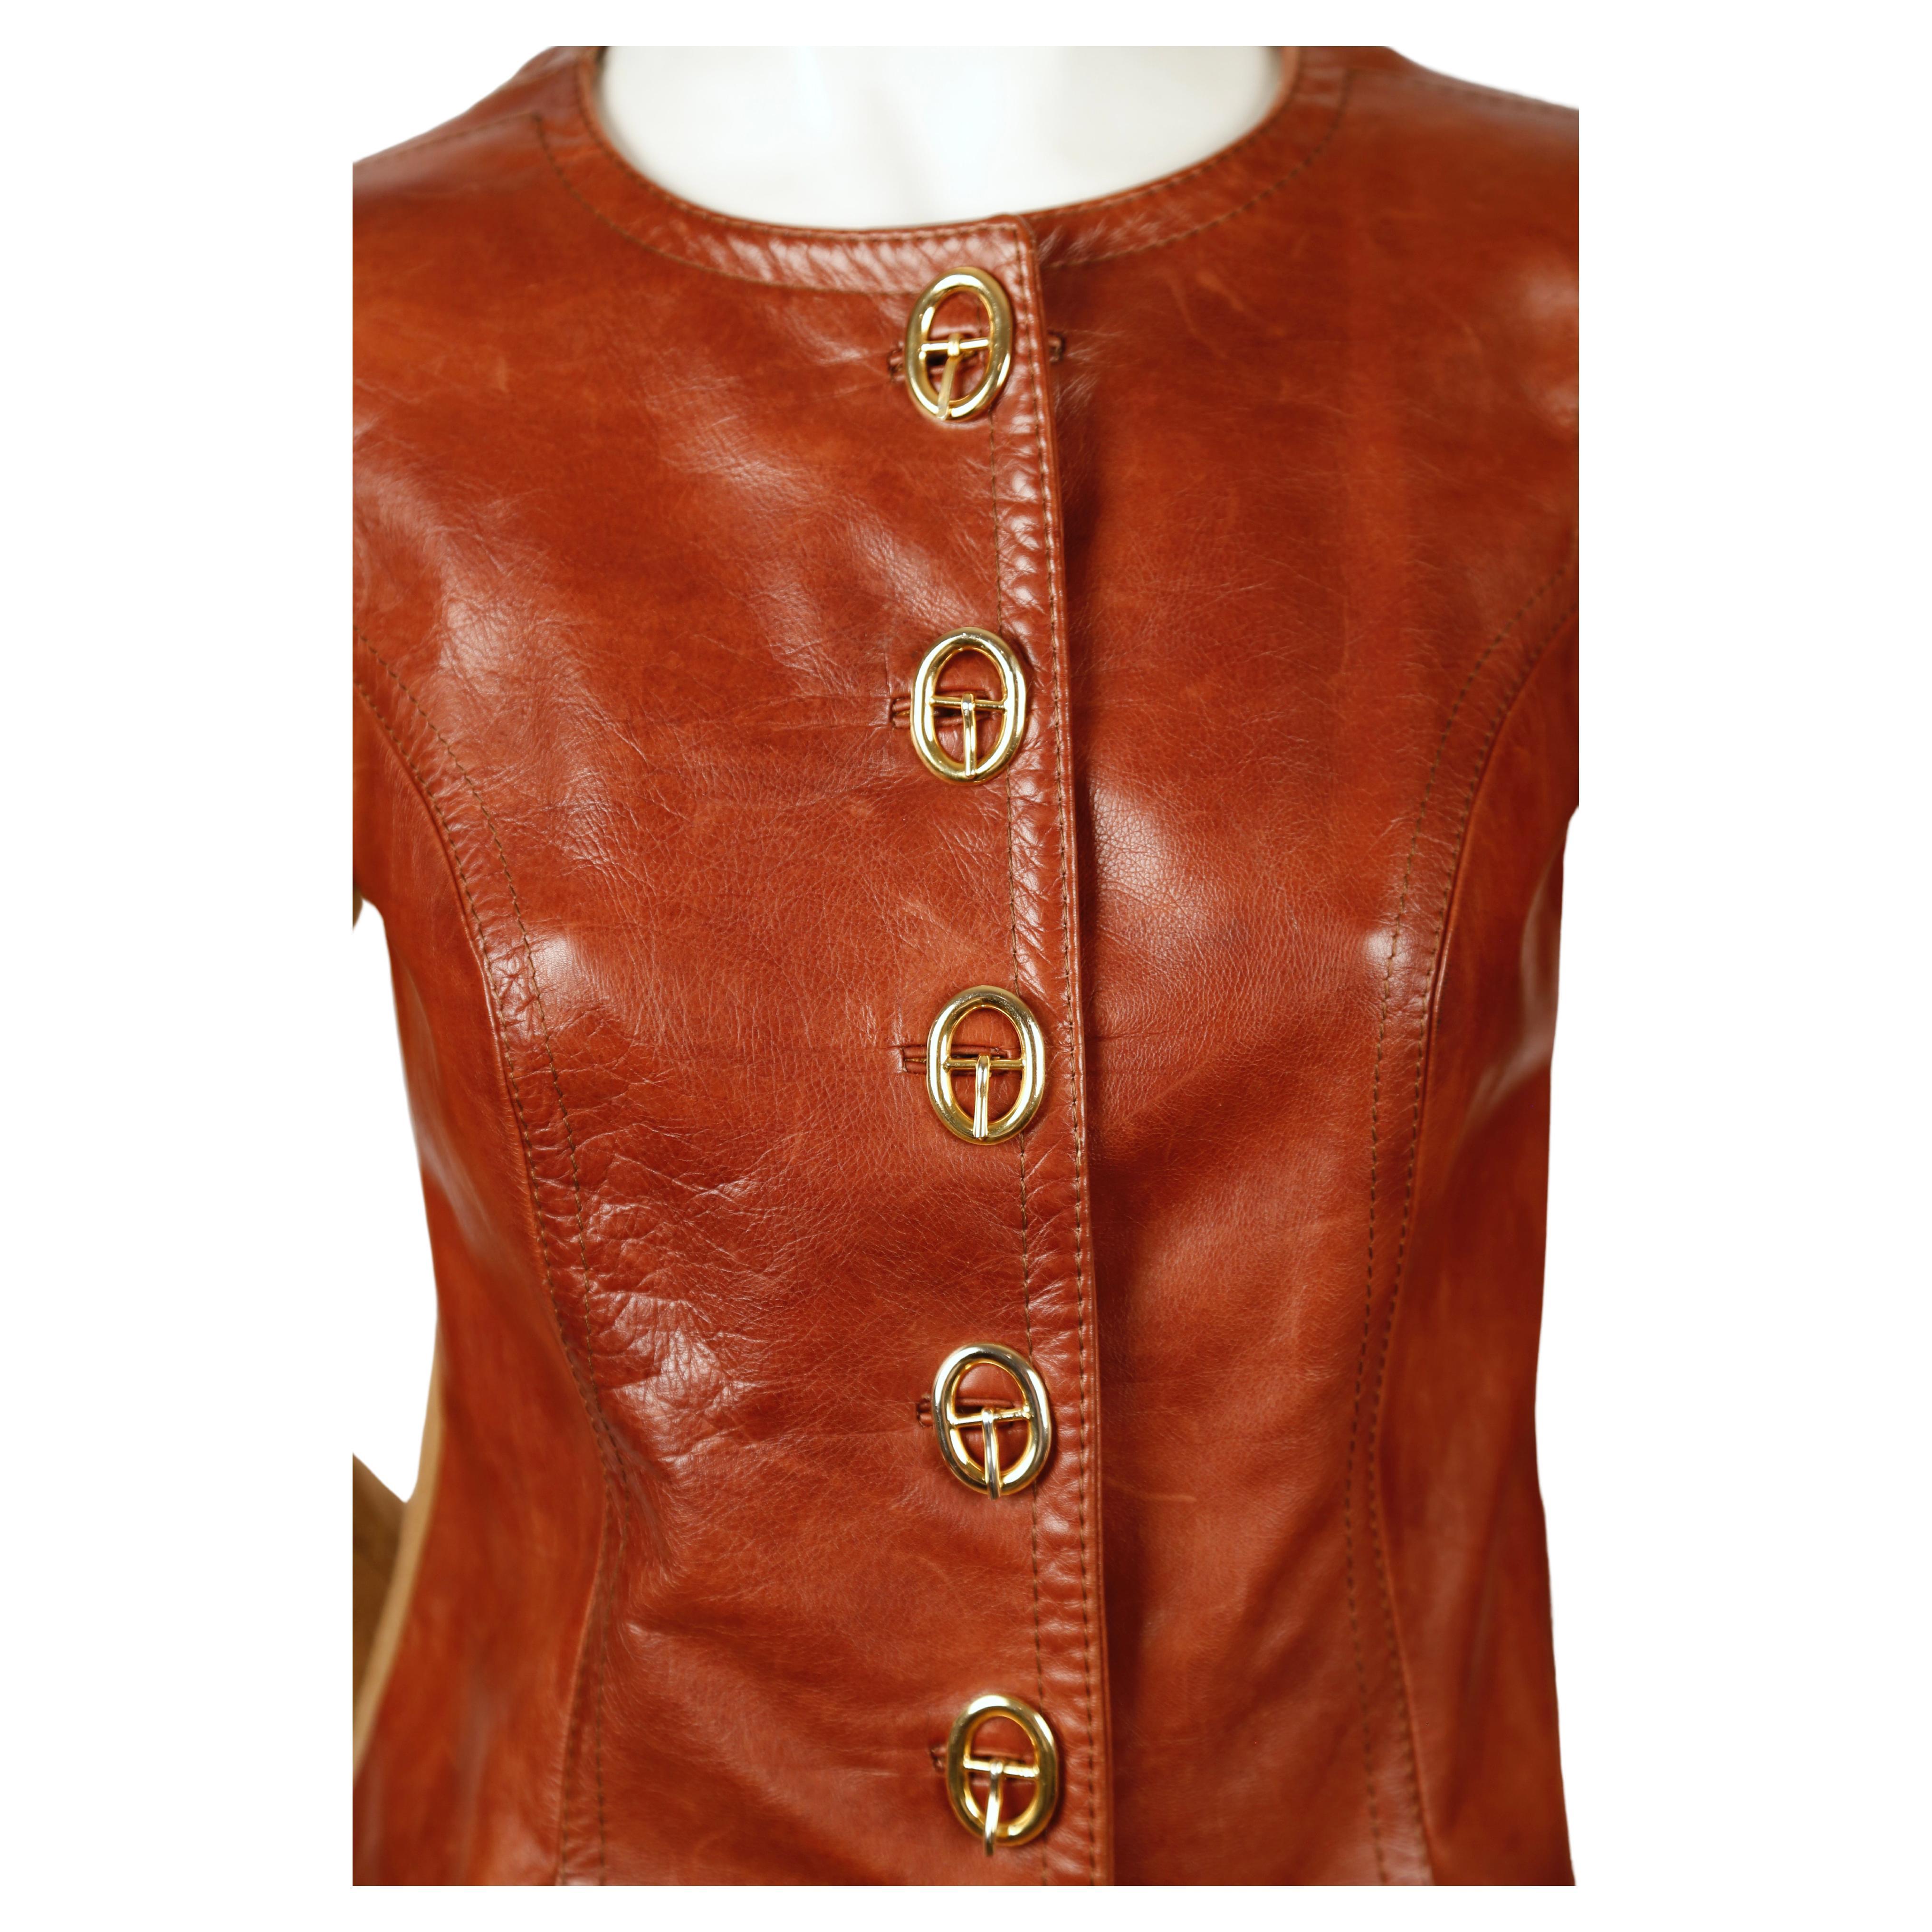 Very unusual sweater jacket with leather front and gold toned 'buckle' button closure designed by Roberta Di Camerino dating to the 1970's. Best fist a US 2-6. Approximate measurements (unstretched): shoulder 13